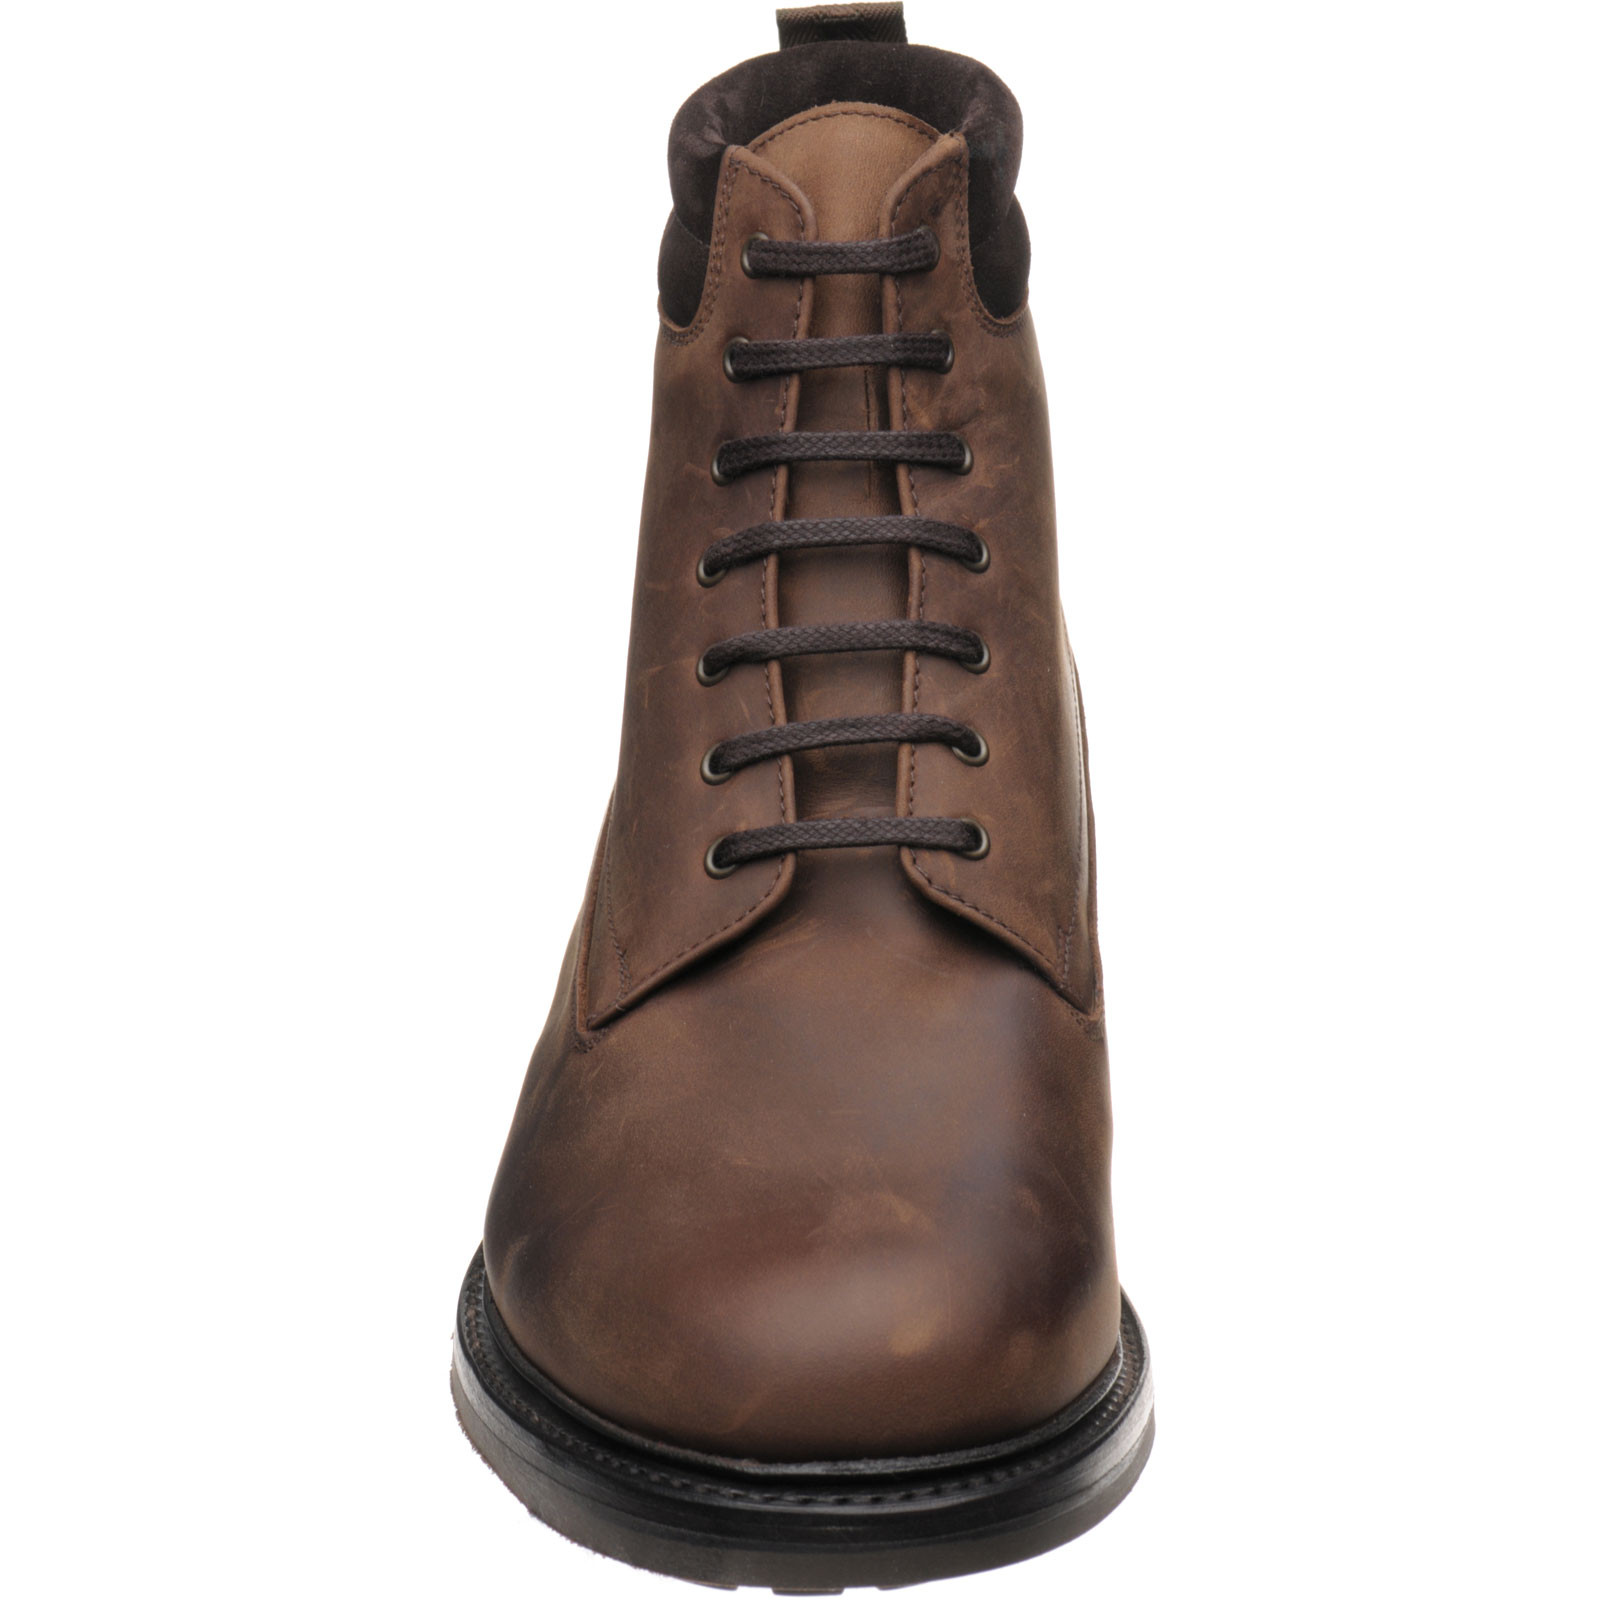 Loake shoes | Loake 1880 Classic | Kirkby in Brown Oiled Nubuck at ...